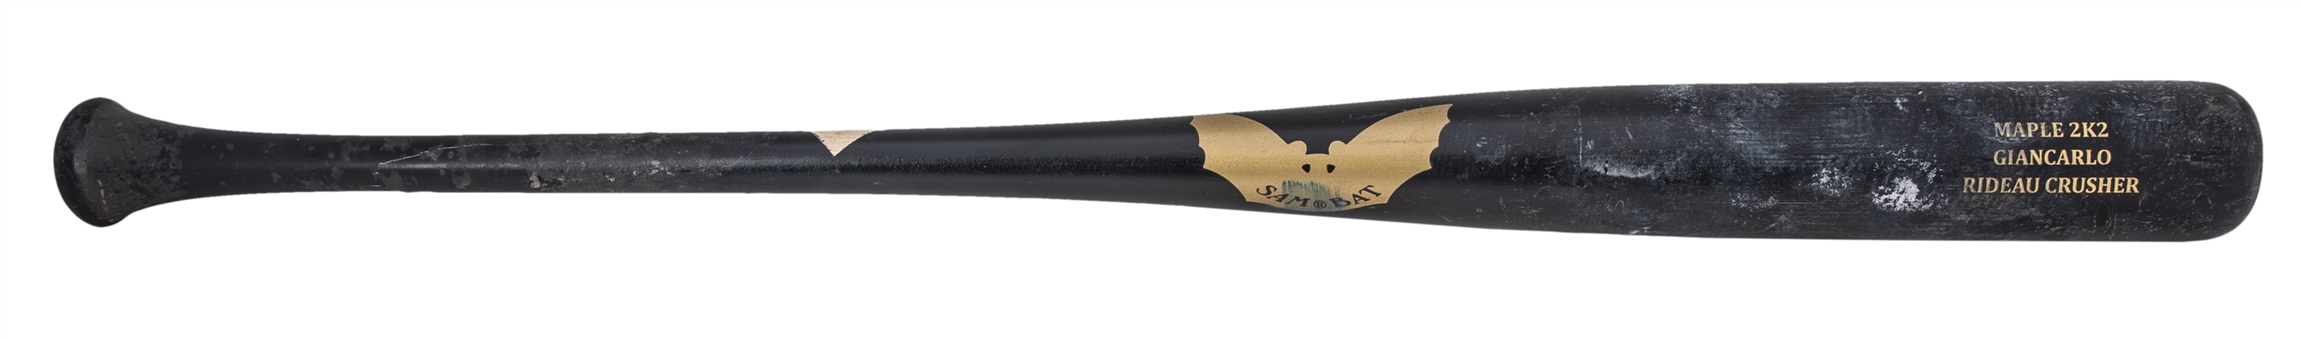 2016 Giancarlo Stanton Game Used 2K2 Model Bat Photomatched to August 13, 2016 vs Chicago White Sox - 3-5 HR 3RBI (Resolution Photomatching & PSA/DNA GU 9.5)